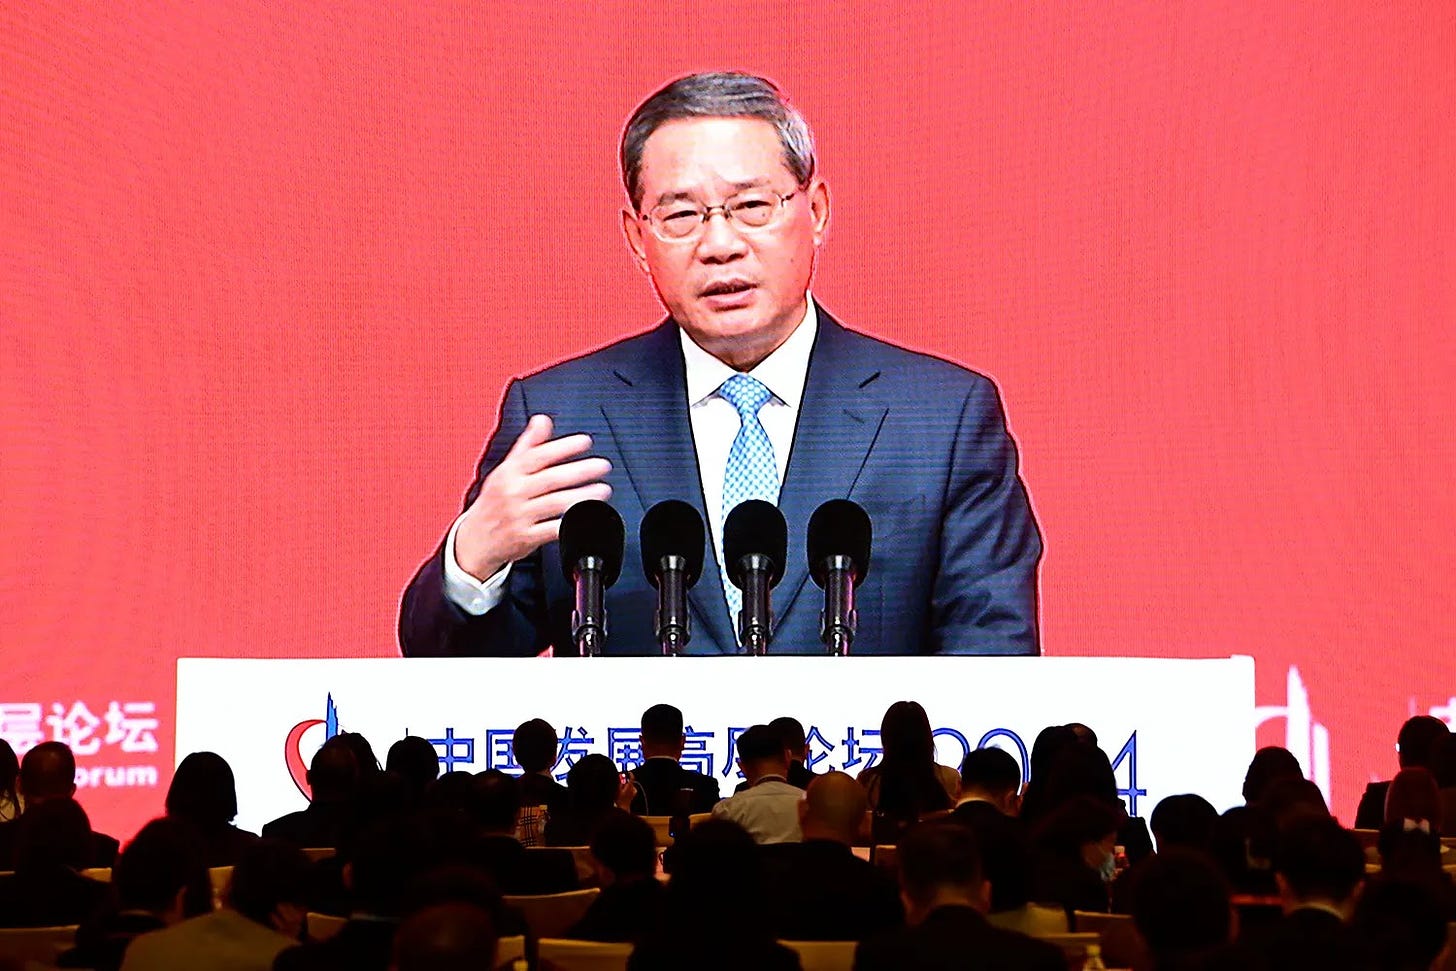 Chinese Premier Li Qiang speaks at the China Development Forum in Beijing.